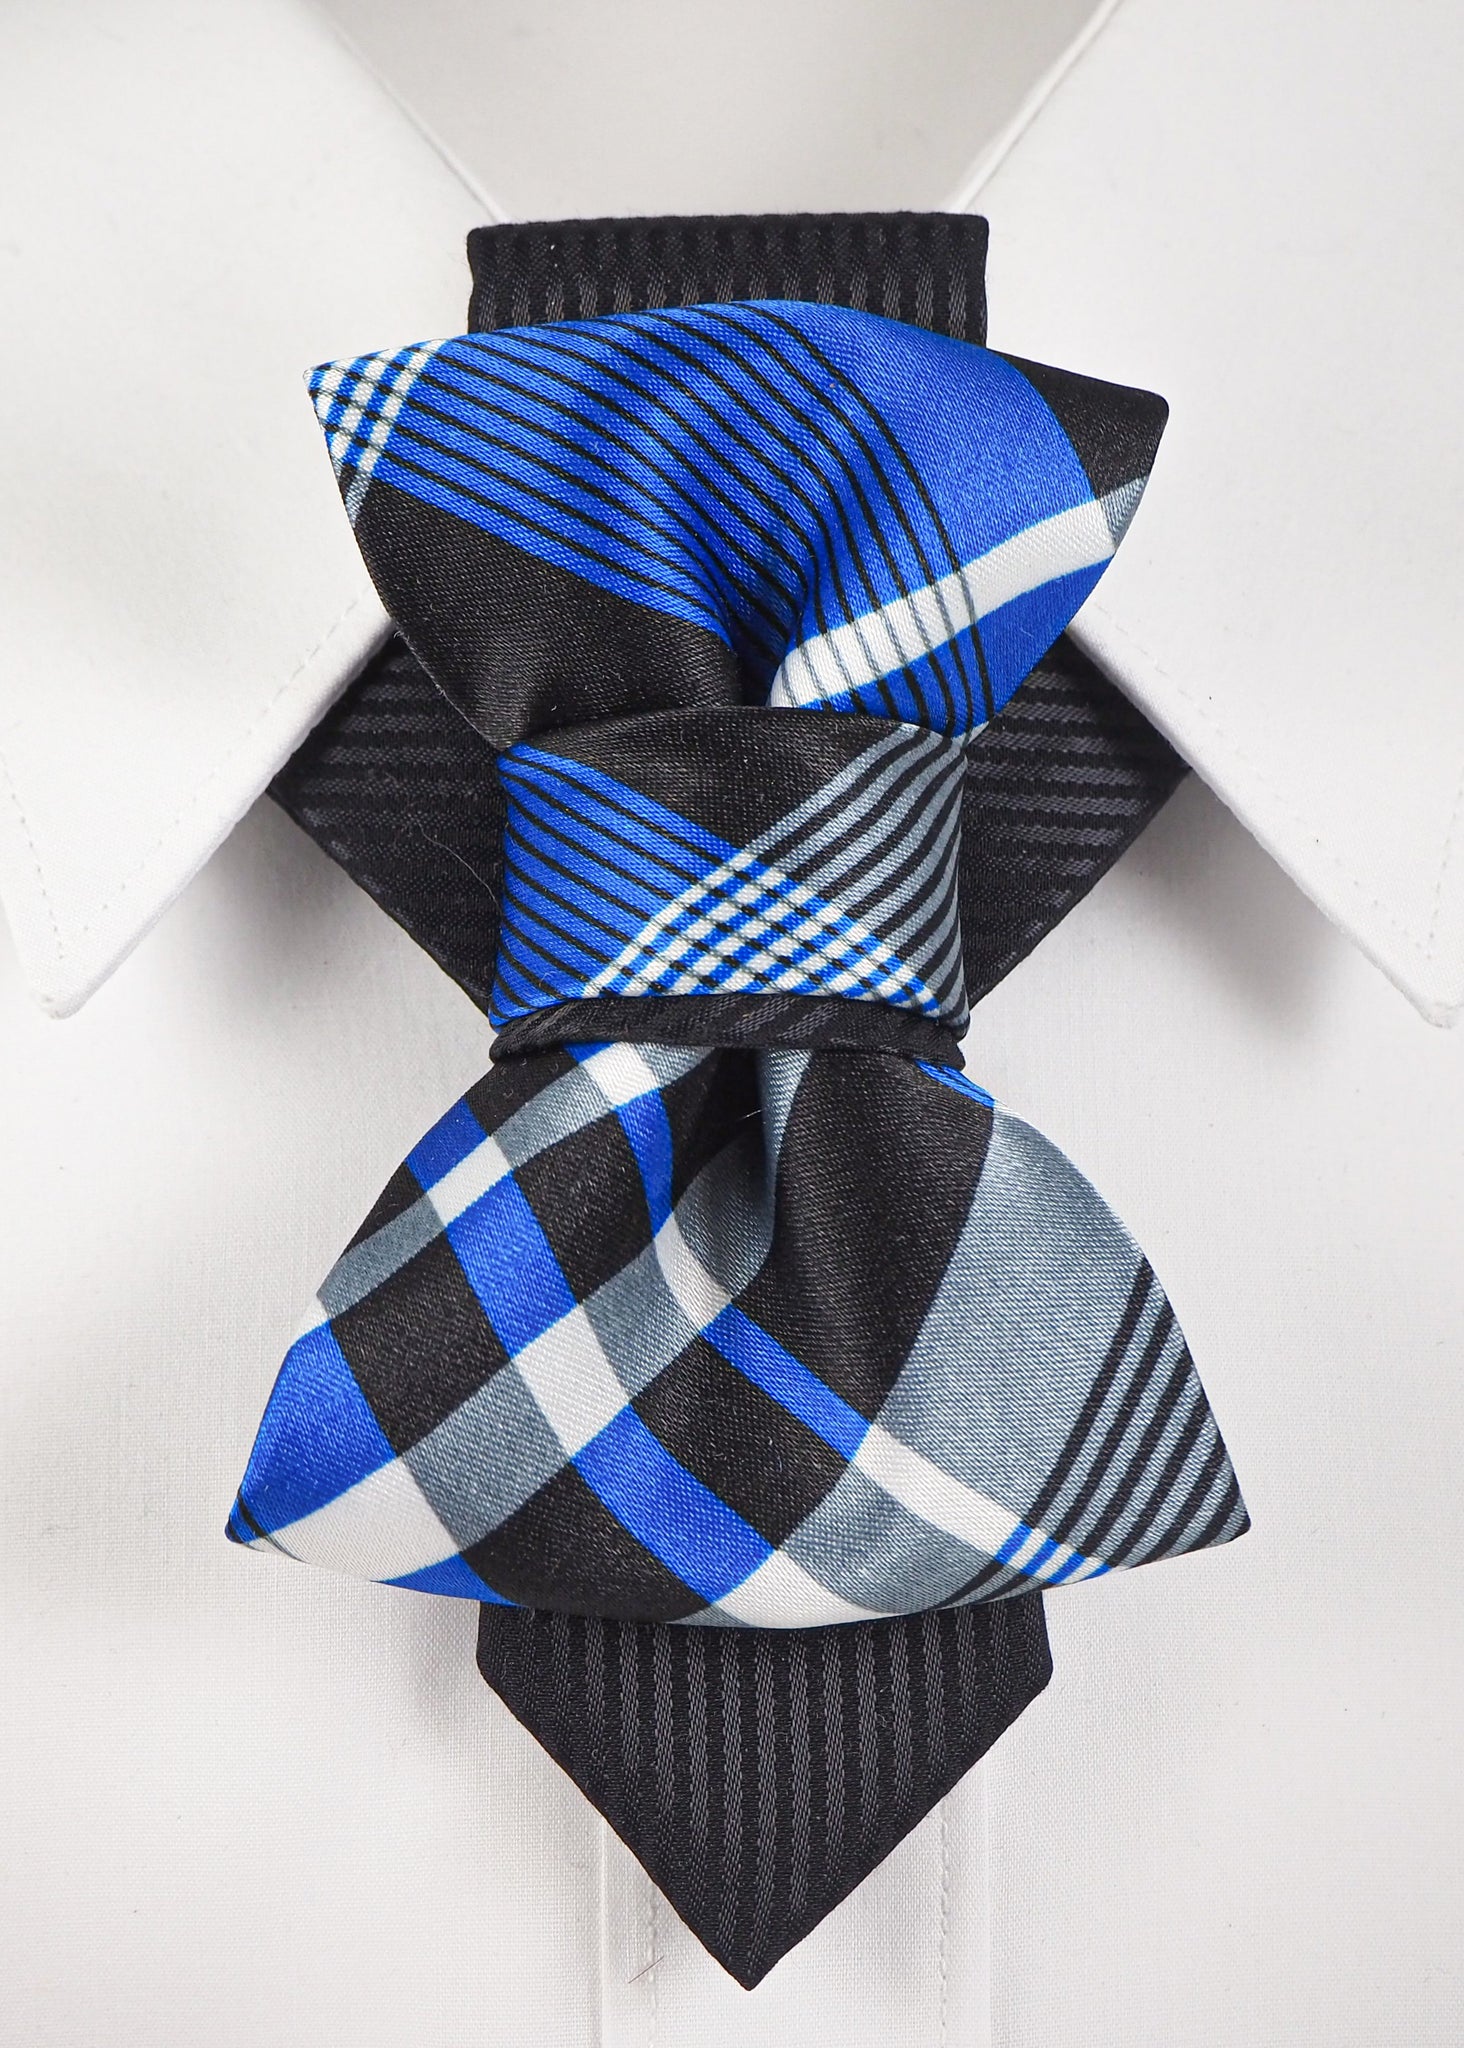 Blue Hopper tie created by Ruty Design for spetial events and every day